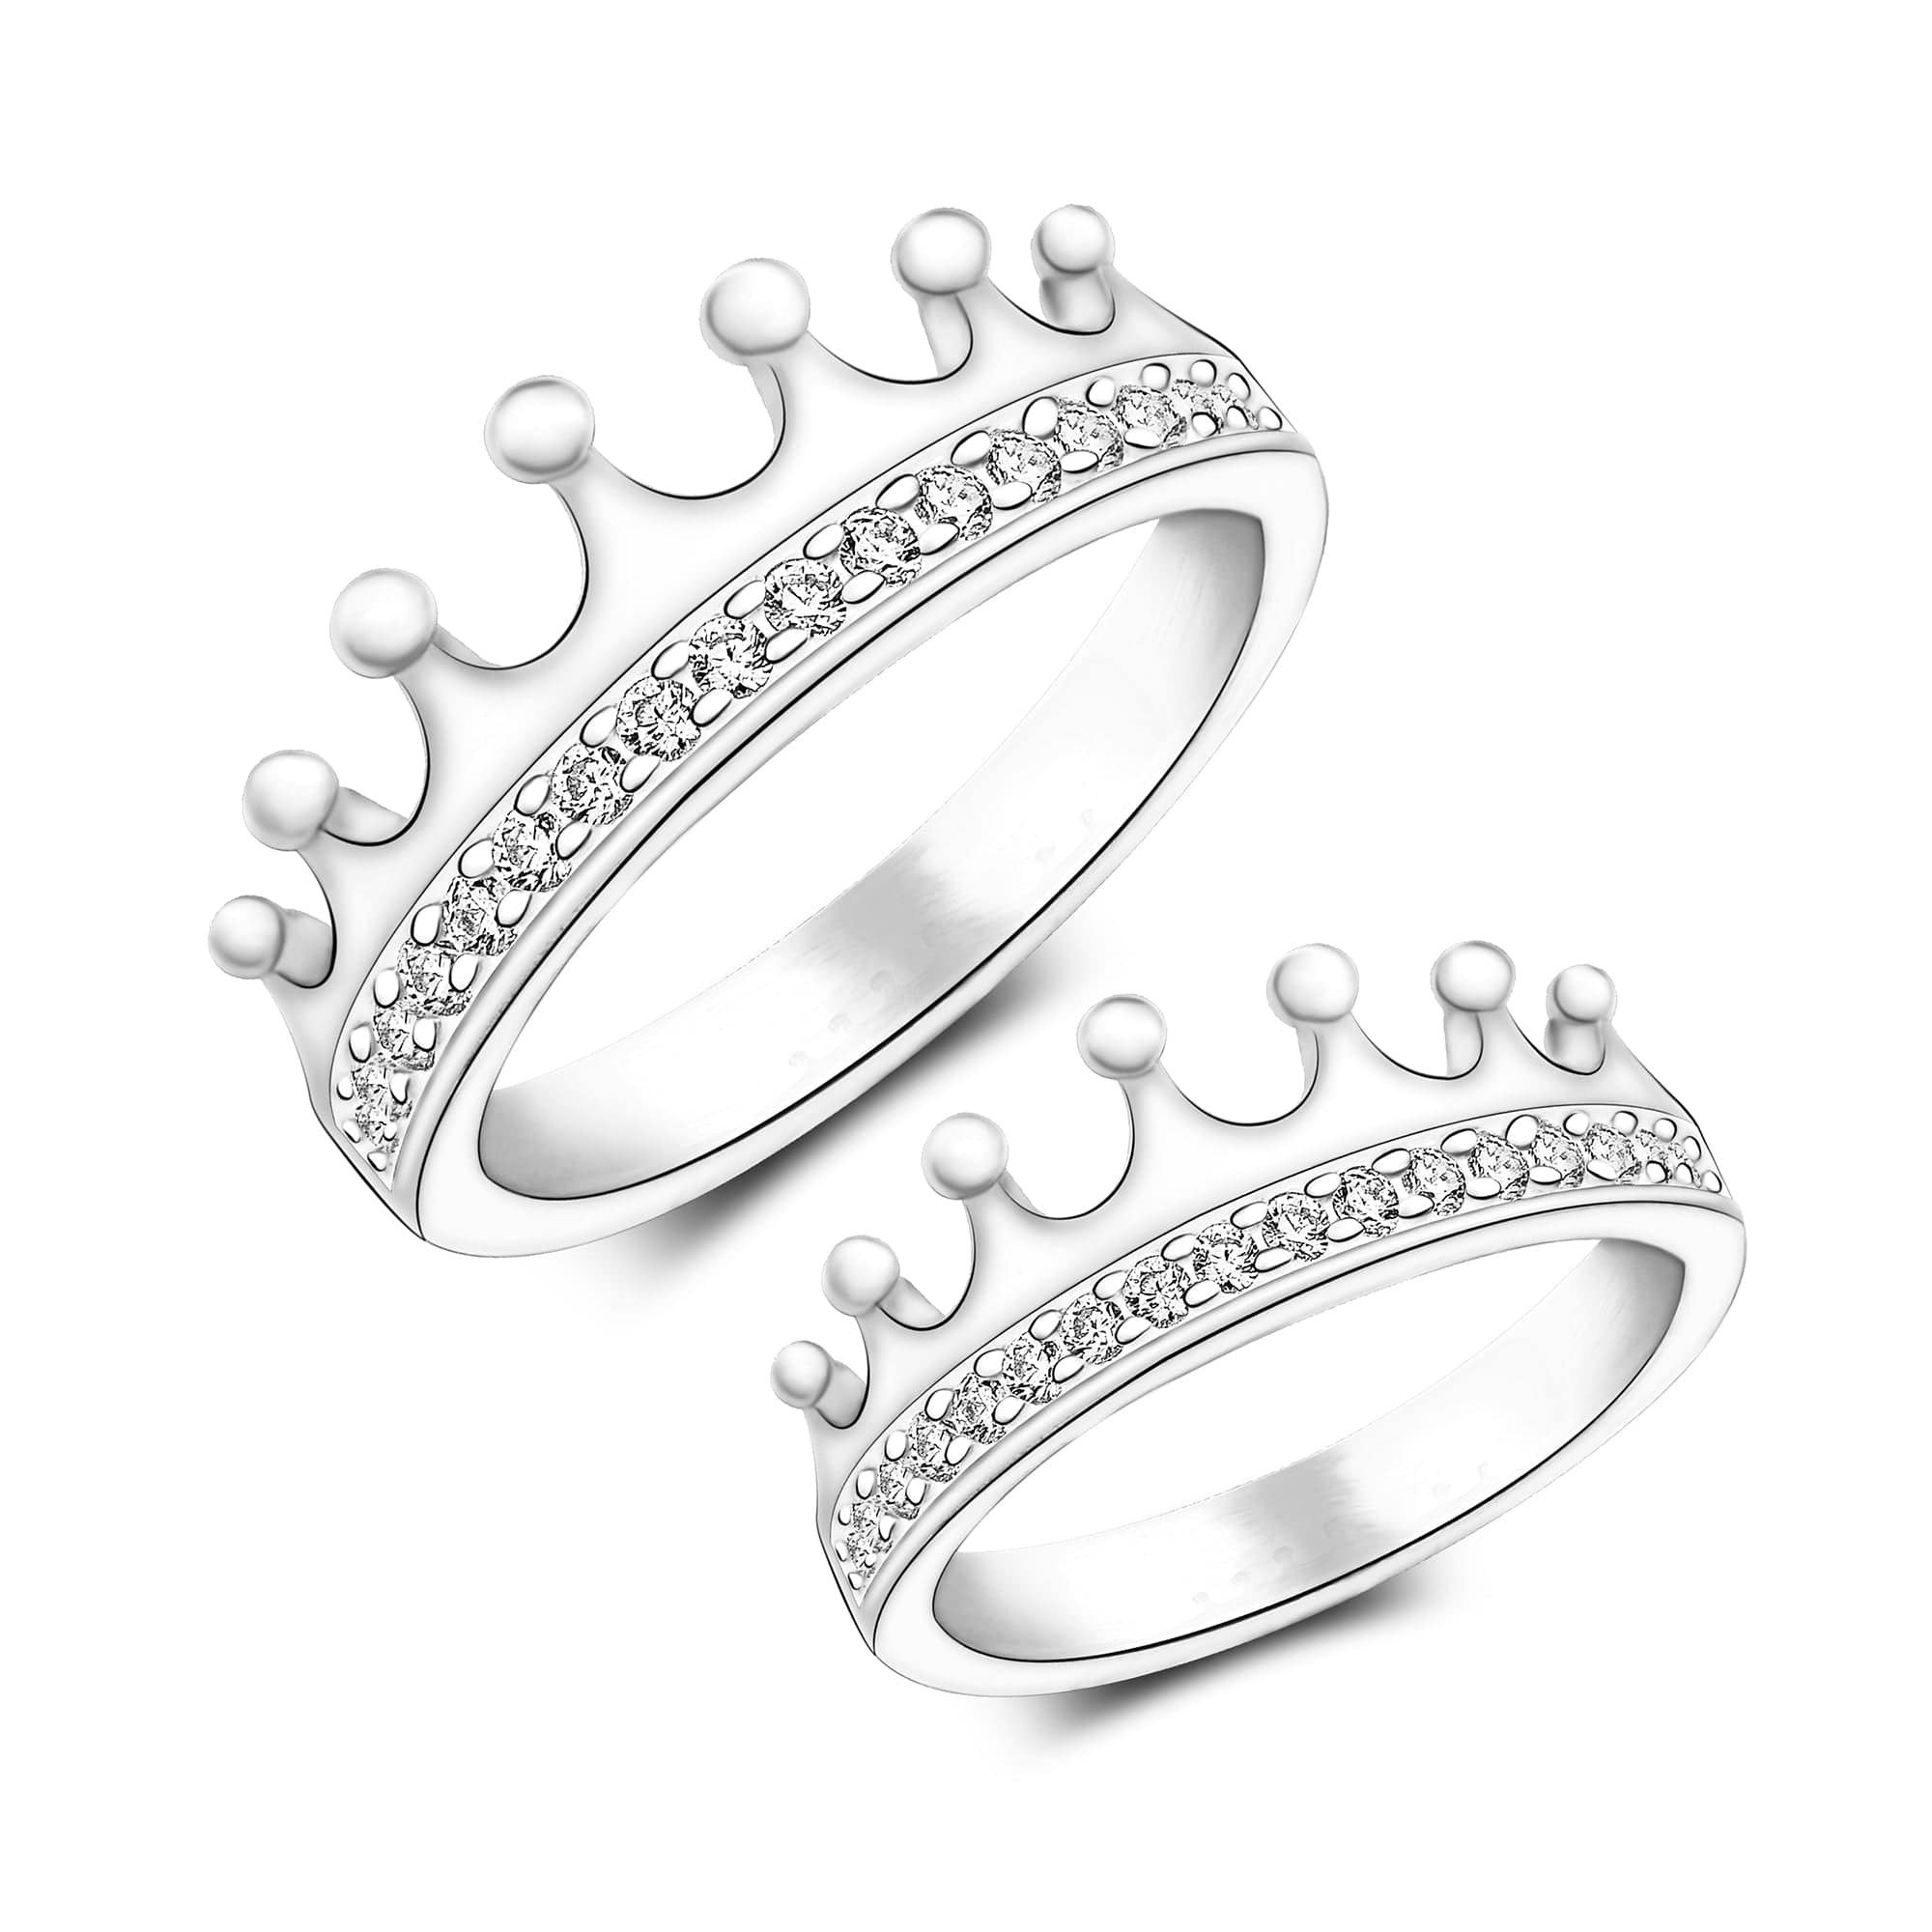 Fashion stainless steel couple ring her king and his queen blue wedding ring ,Couple Ring Wedding